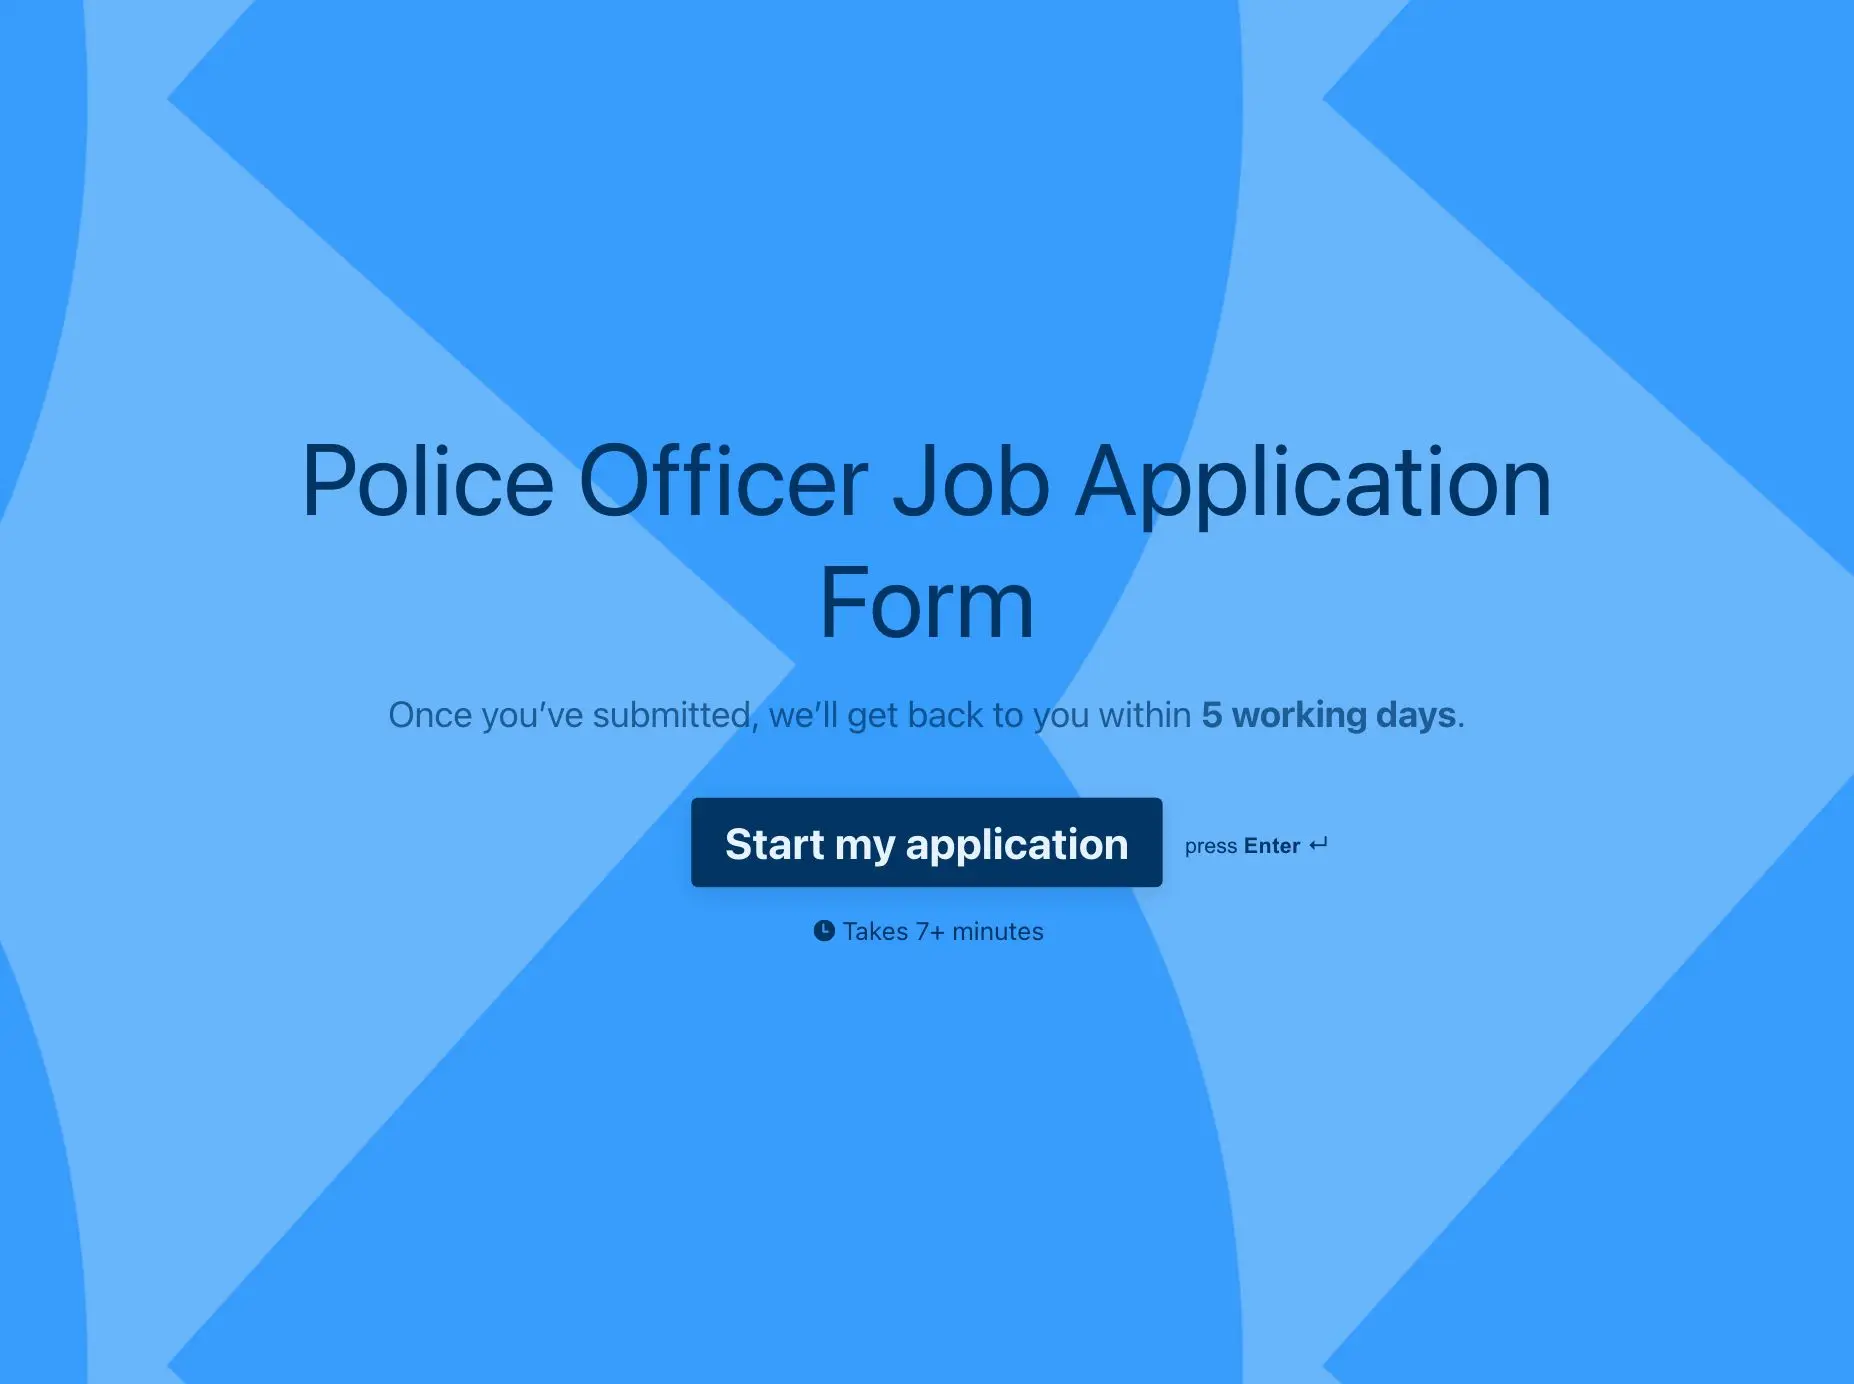 Police Officer Job Application Form Template Hero